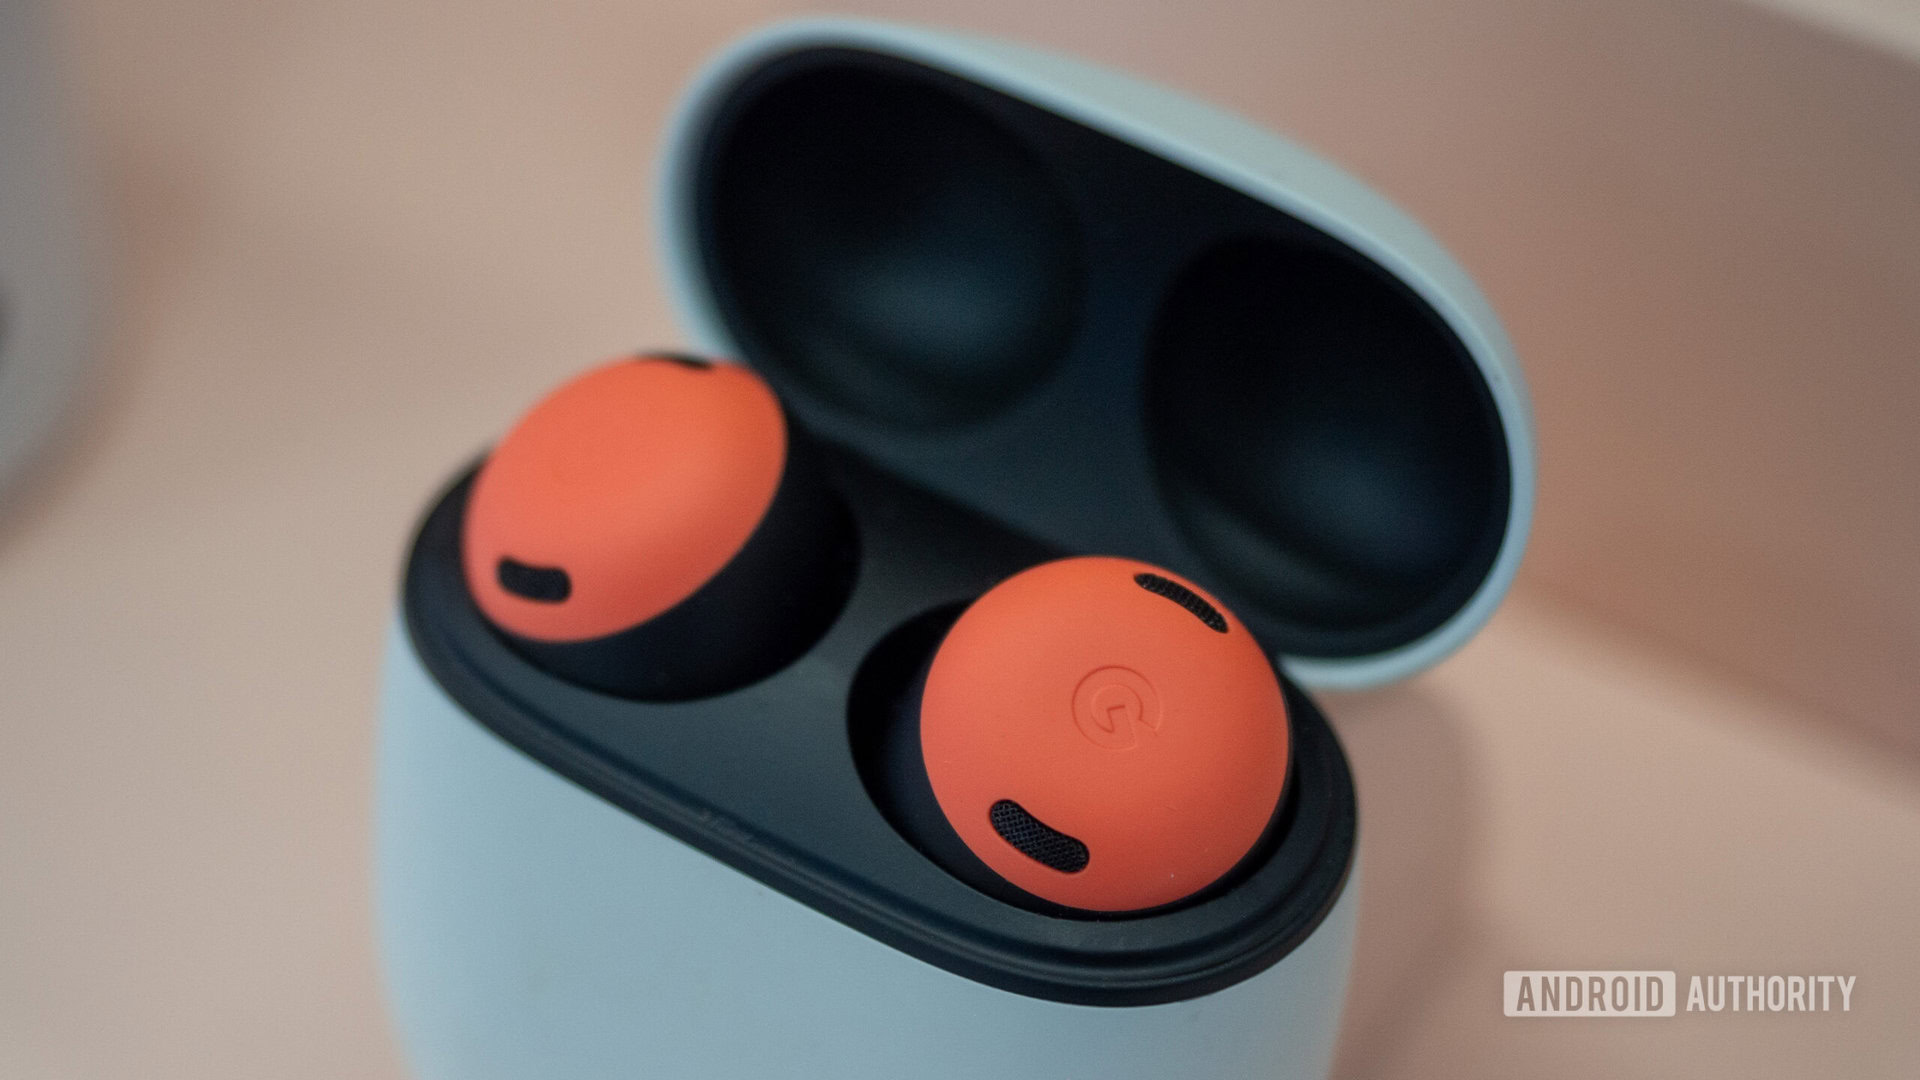 The Pixel Buds Pro are an absolute steal in this 40% off Prime Day deal